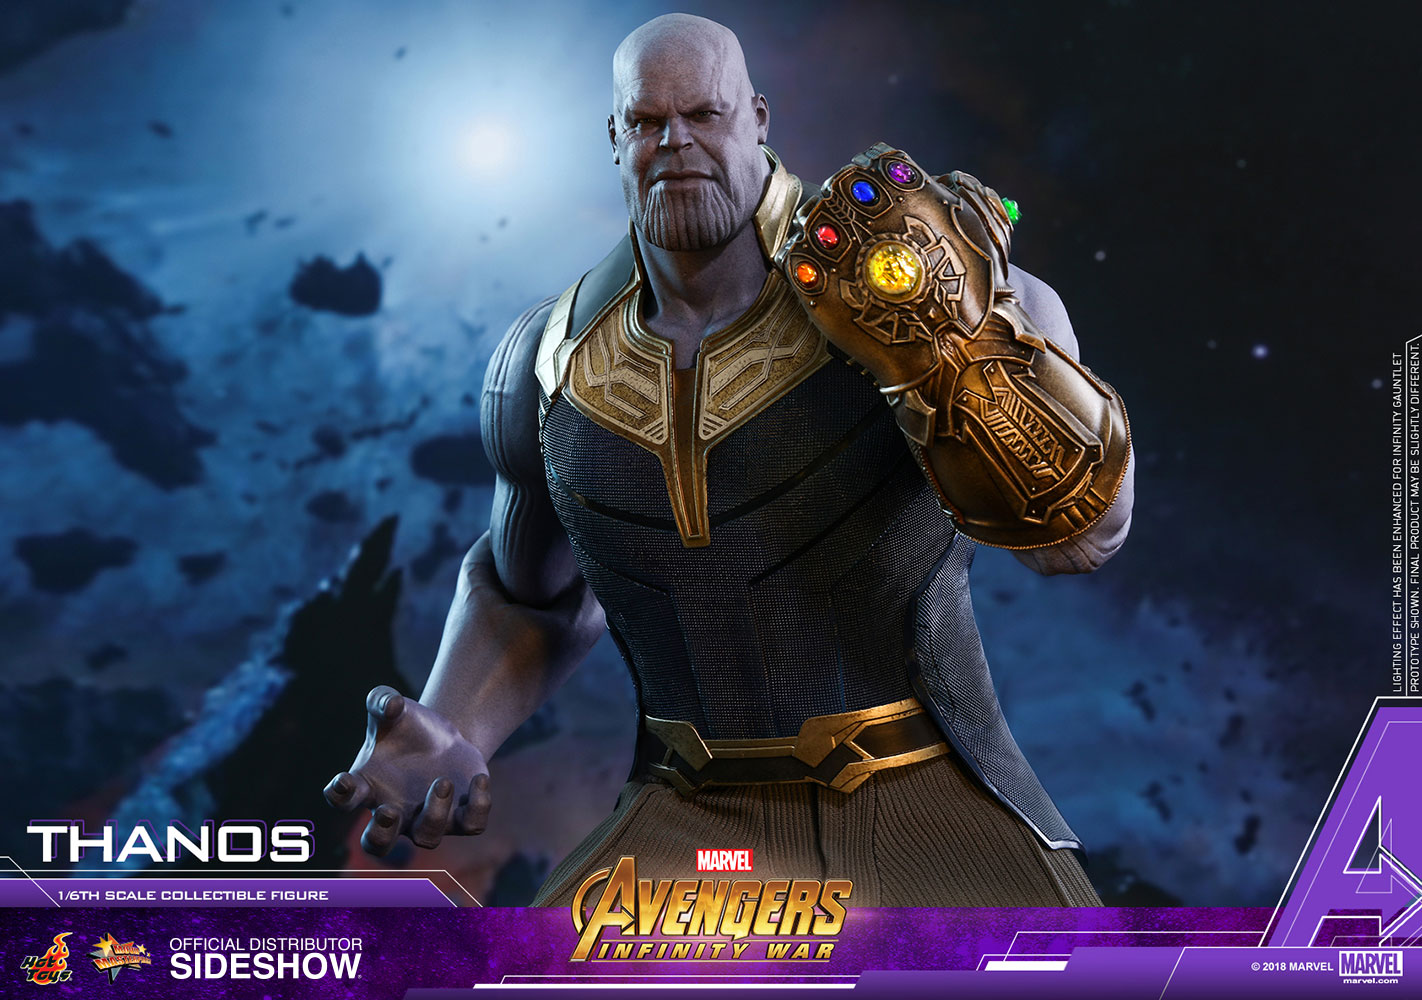 marvel-avengers-infinity-war-thanos-sixth-scale-figure-hot-toys-903429-10